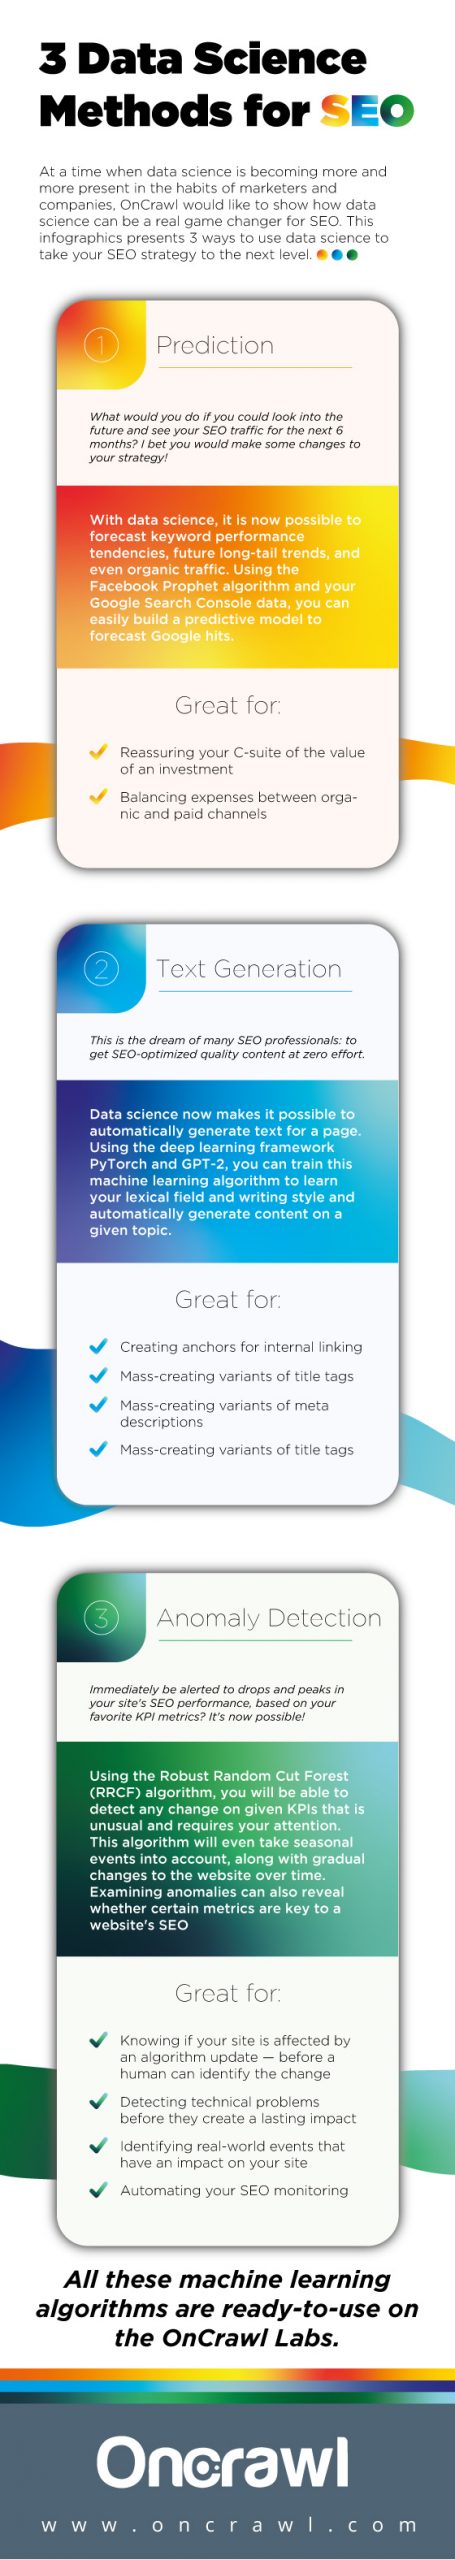 seo-data-science-infographic